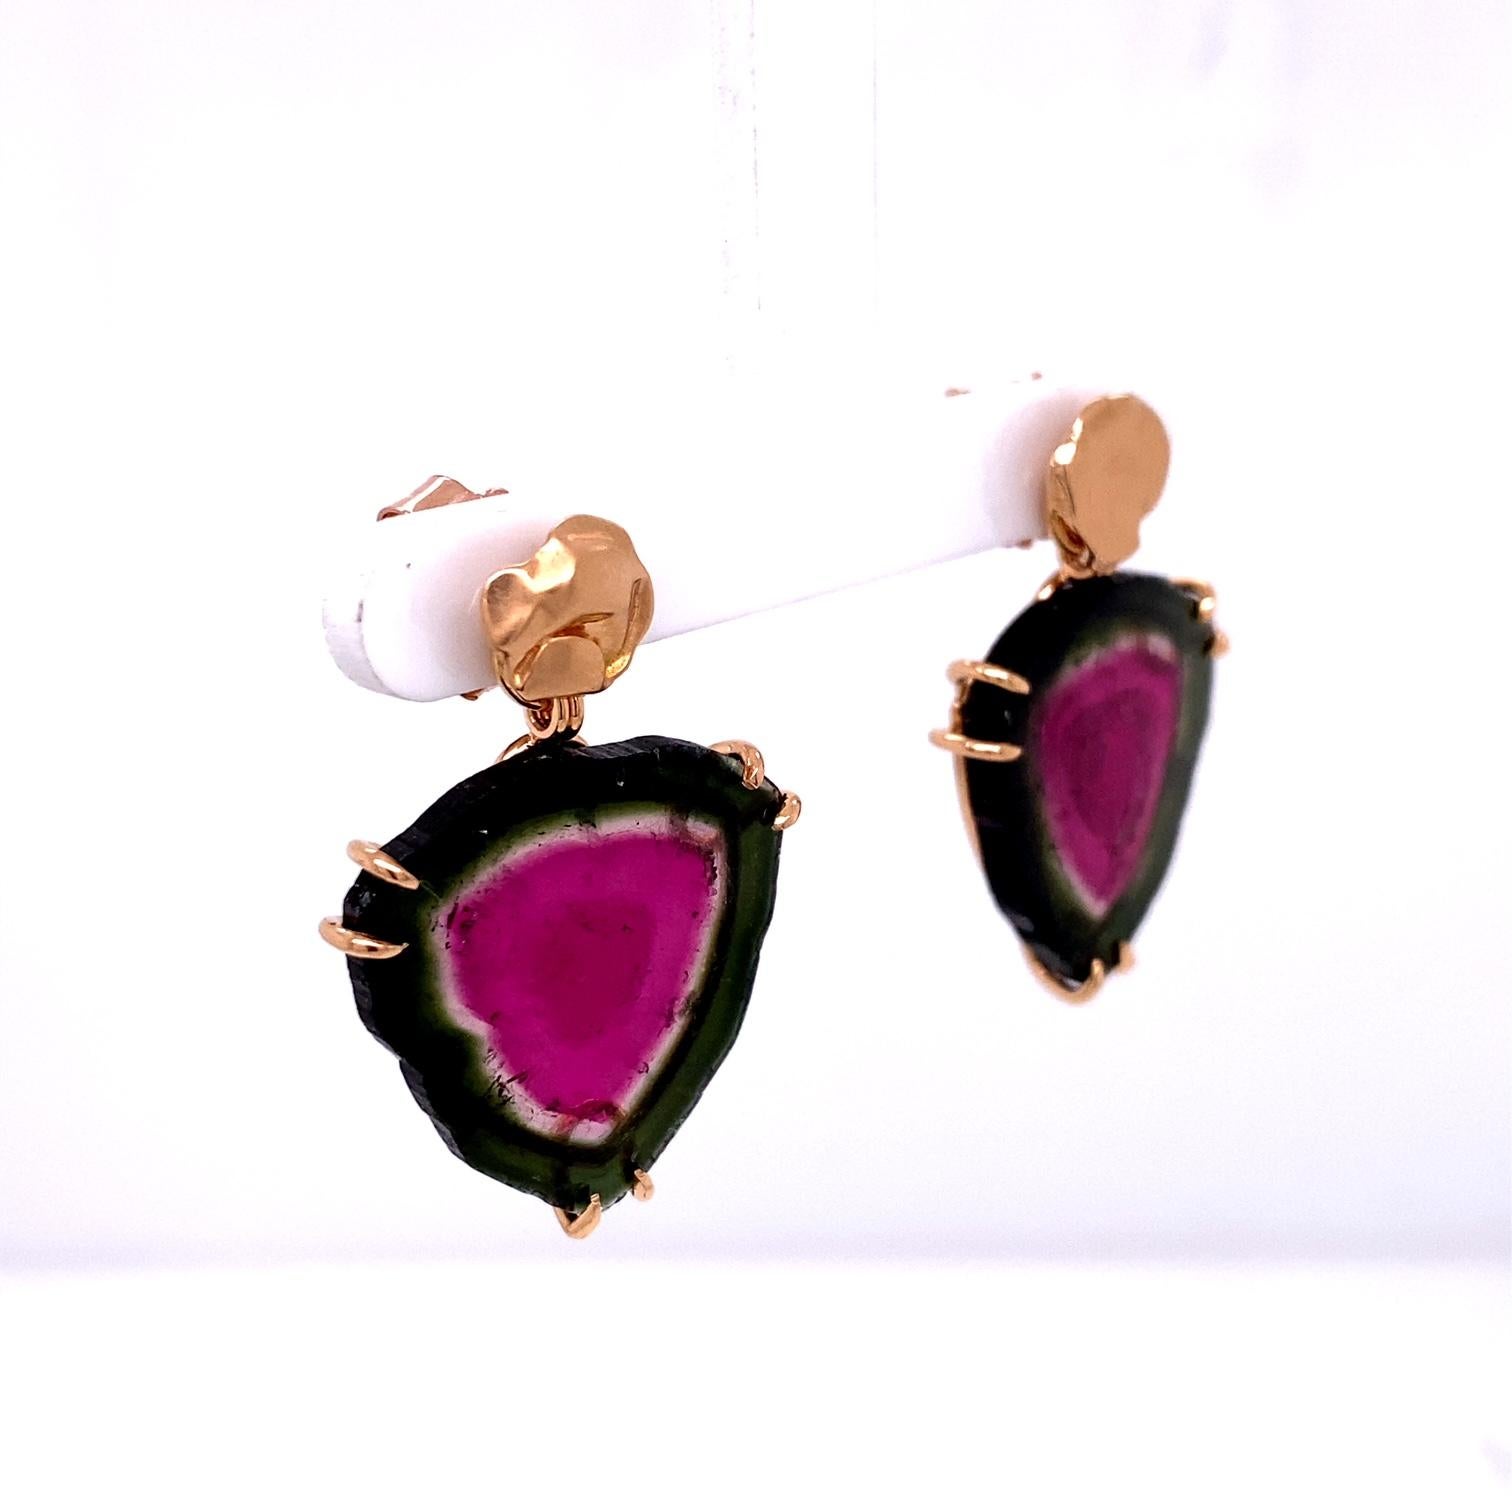 A pair of 18k rose gold freeform earring studs, with a pair of watermelon tourmaline earring jackets in 18k rose gold. These earrings were made and designed by llyn strong.
Items sold separately upon request.